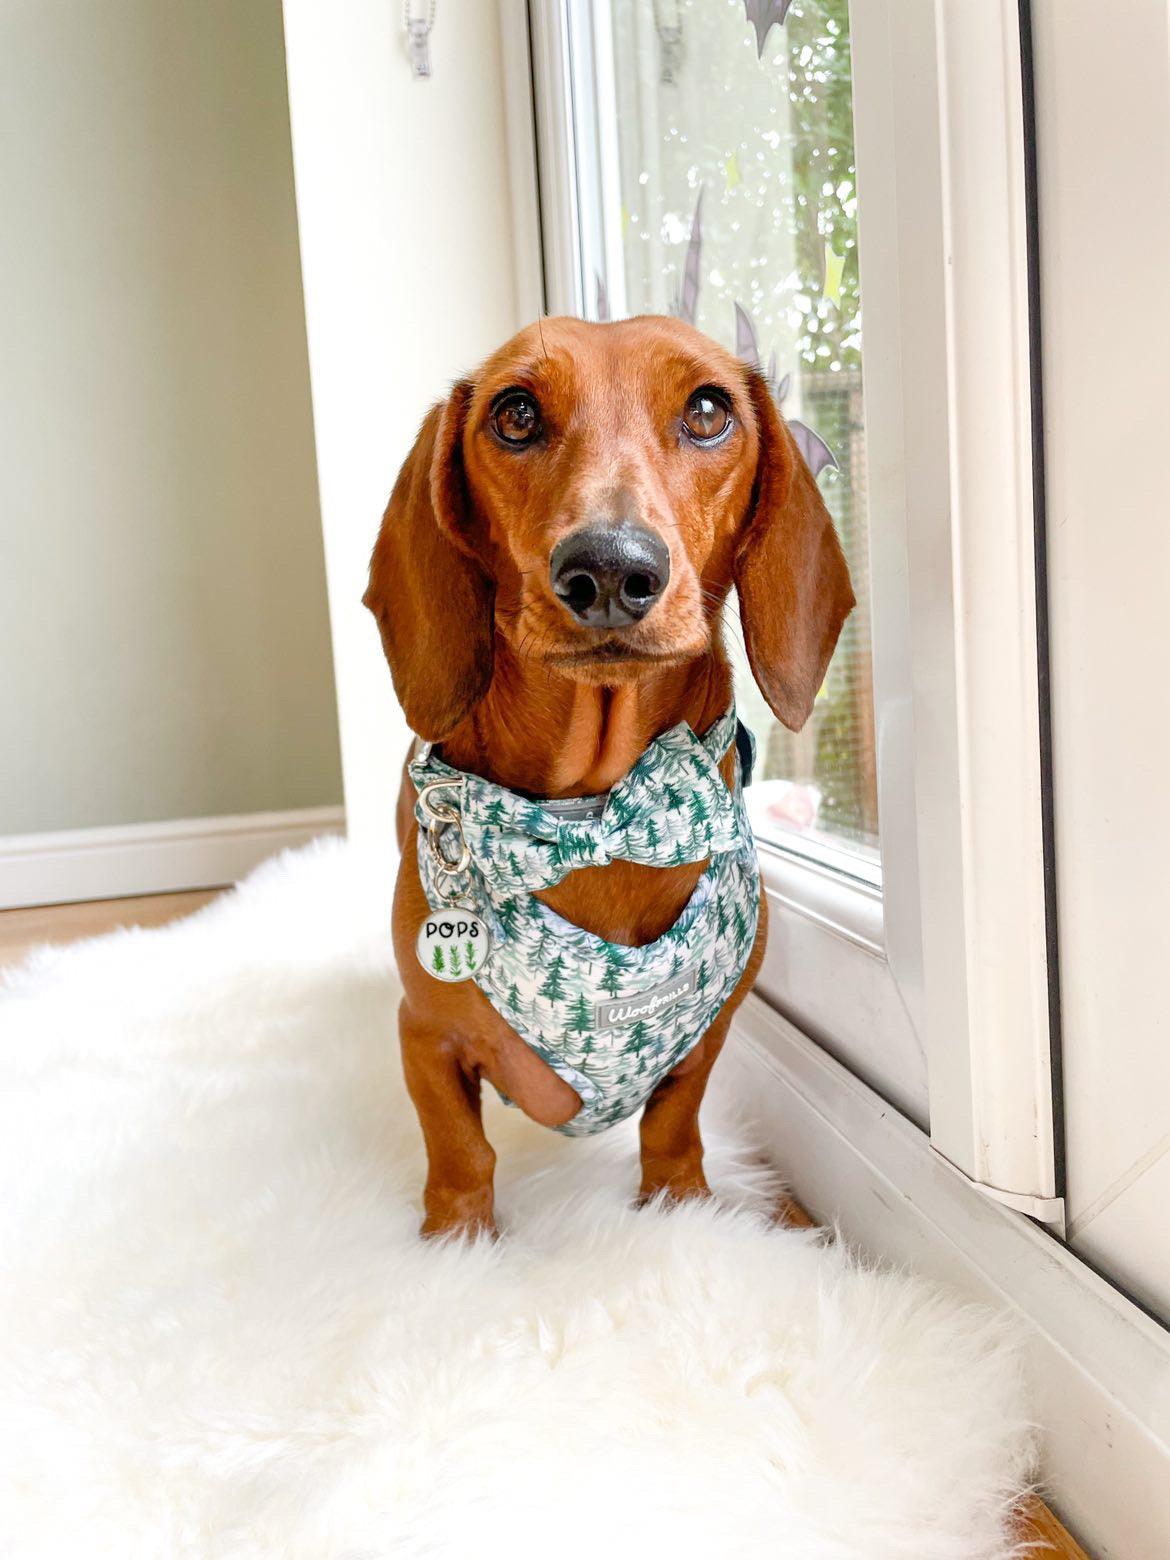 Standard dachshund wearing a adjustable dog harness and dicky dog bow tie